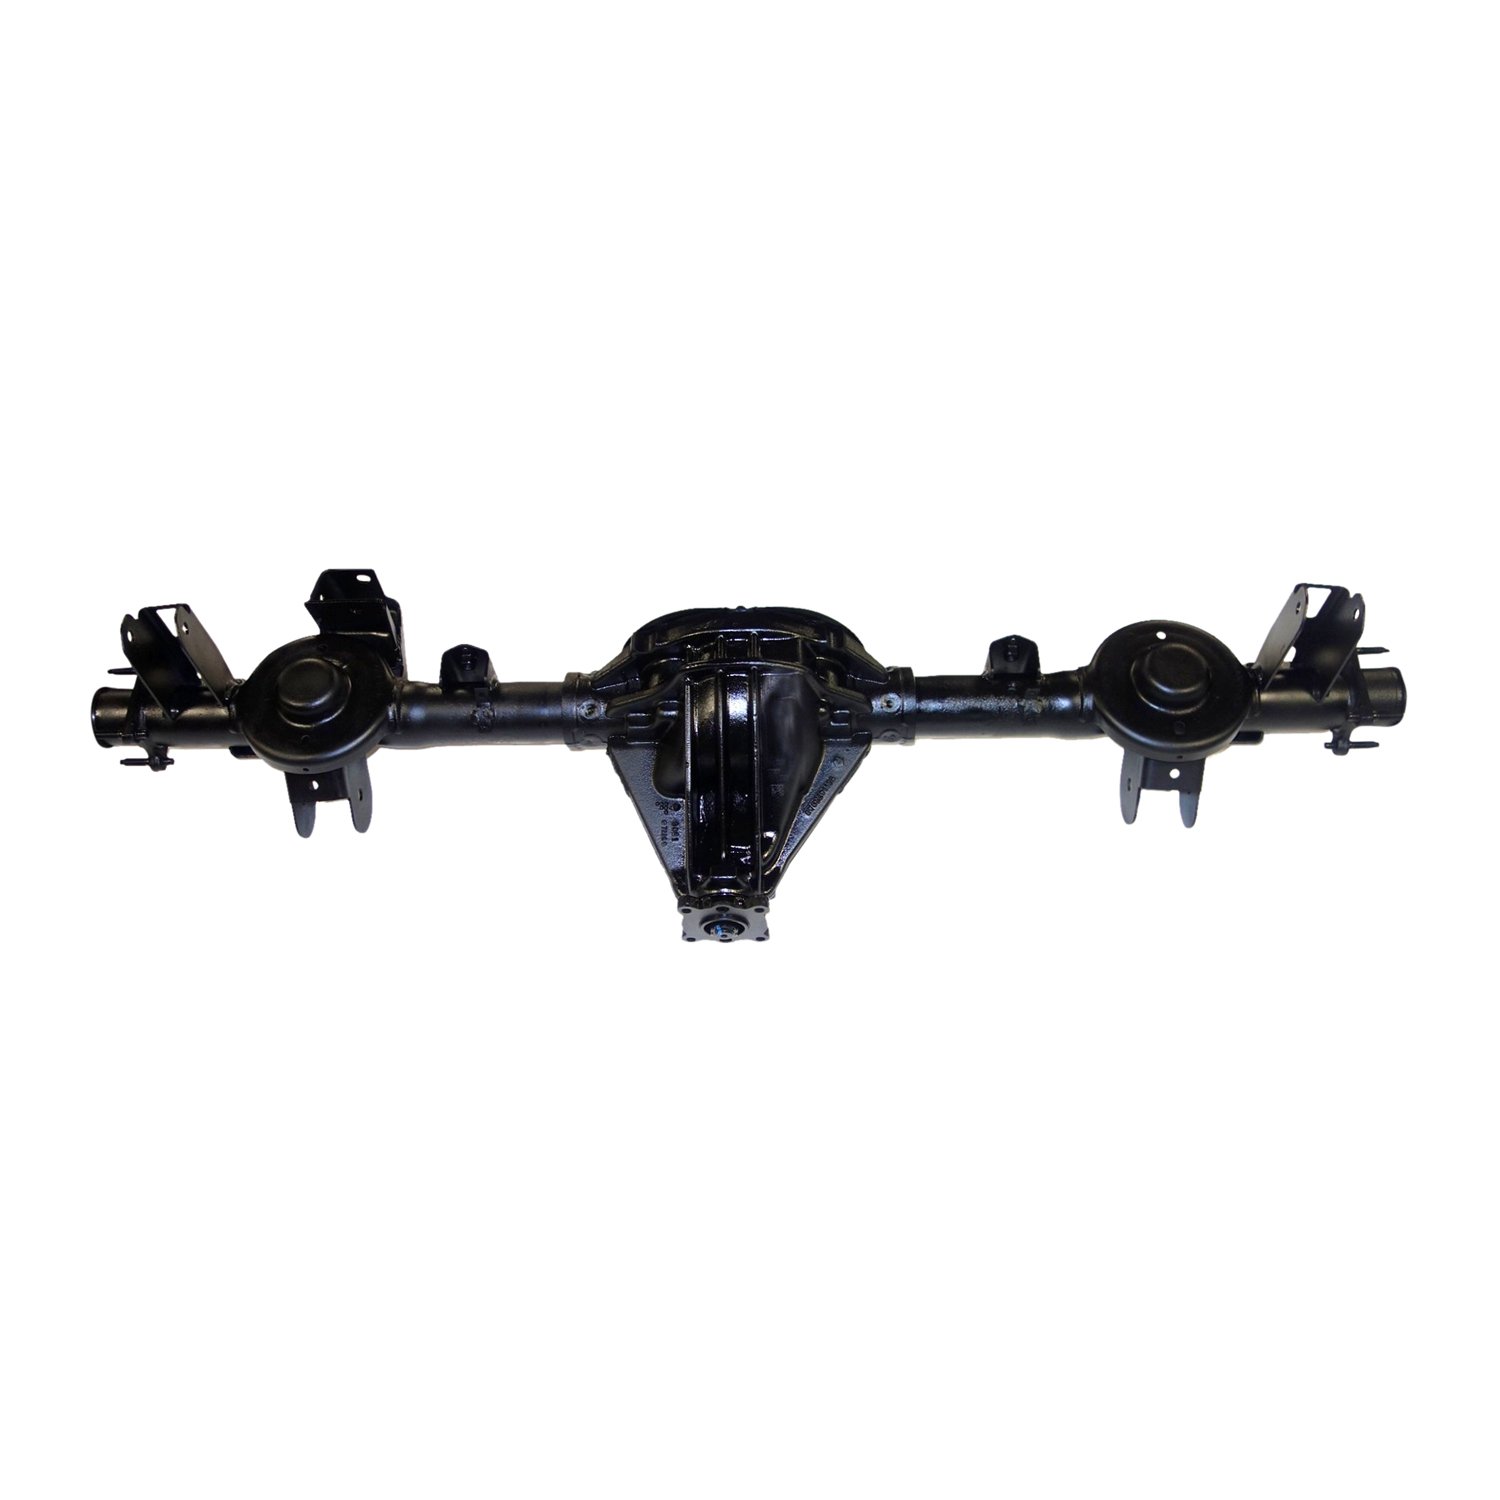 Remanufactured Axle Assy for Chy 8.25" 07-10 Comm&er, Grand Cherokee 3.73 Posi LSD